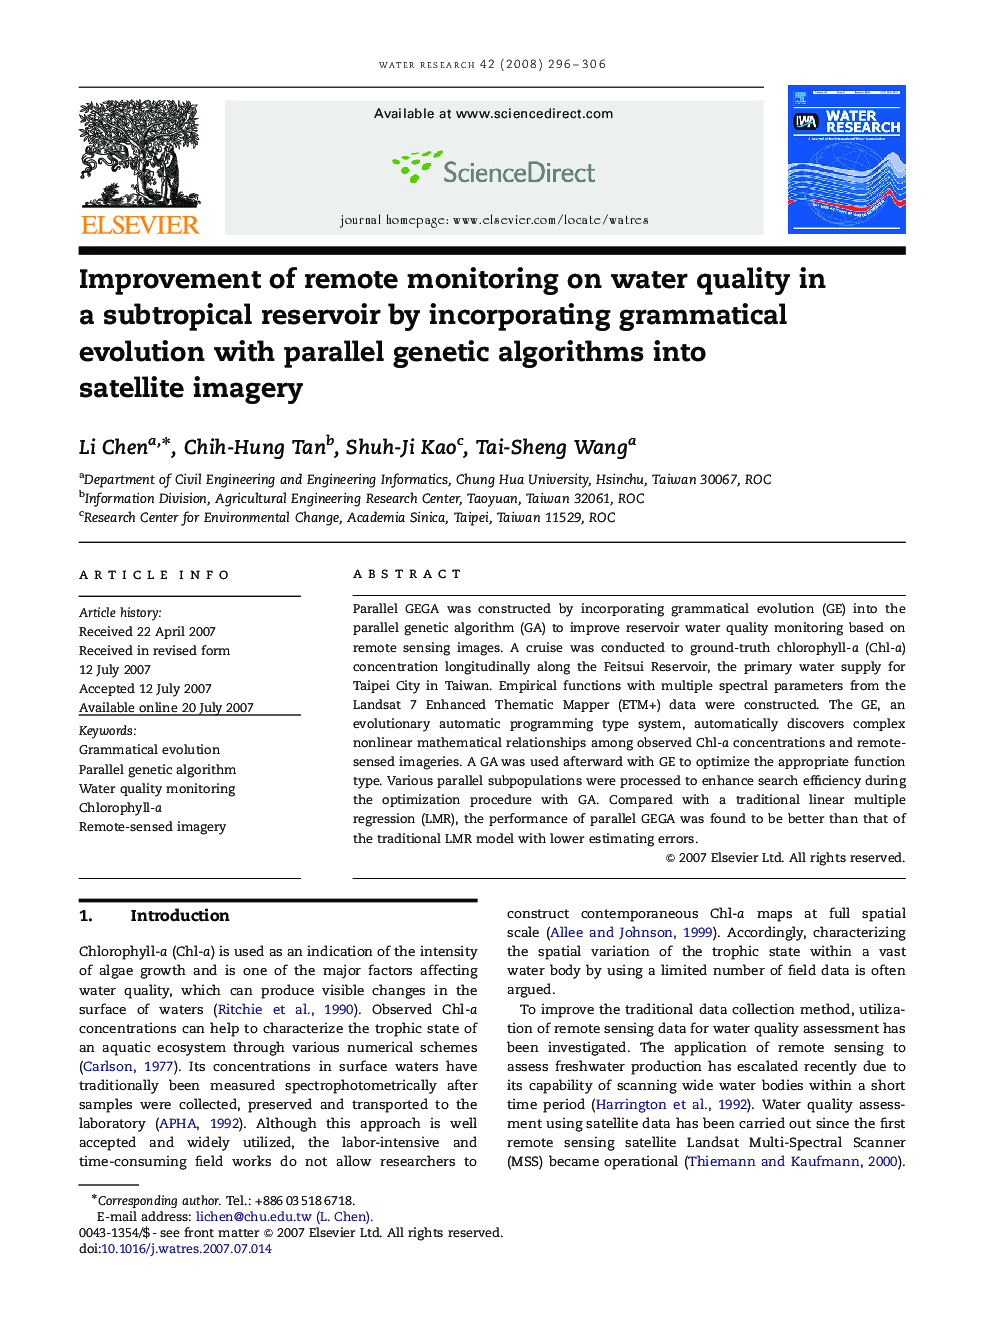 Improvement of remote monitoring on water quality in a subtropical reservoir by incorporating grammatical evolution with parallel genetic algorithms into satellite imagery